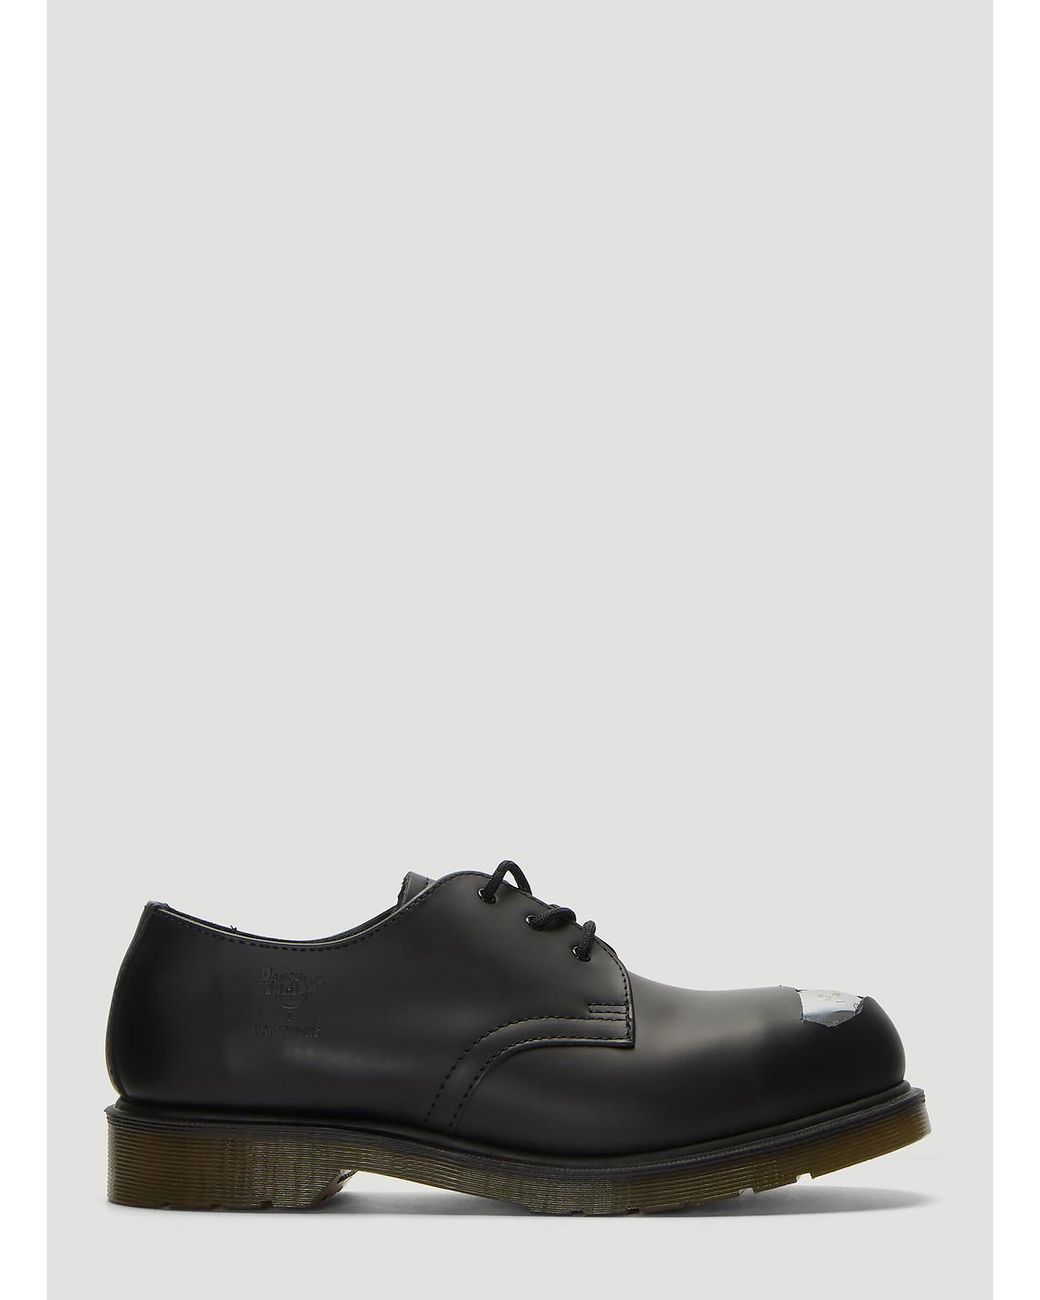 Raf Simons X Dr. Martens Exposed Steel Toe Shoes In Black for Men | Lyst